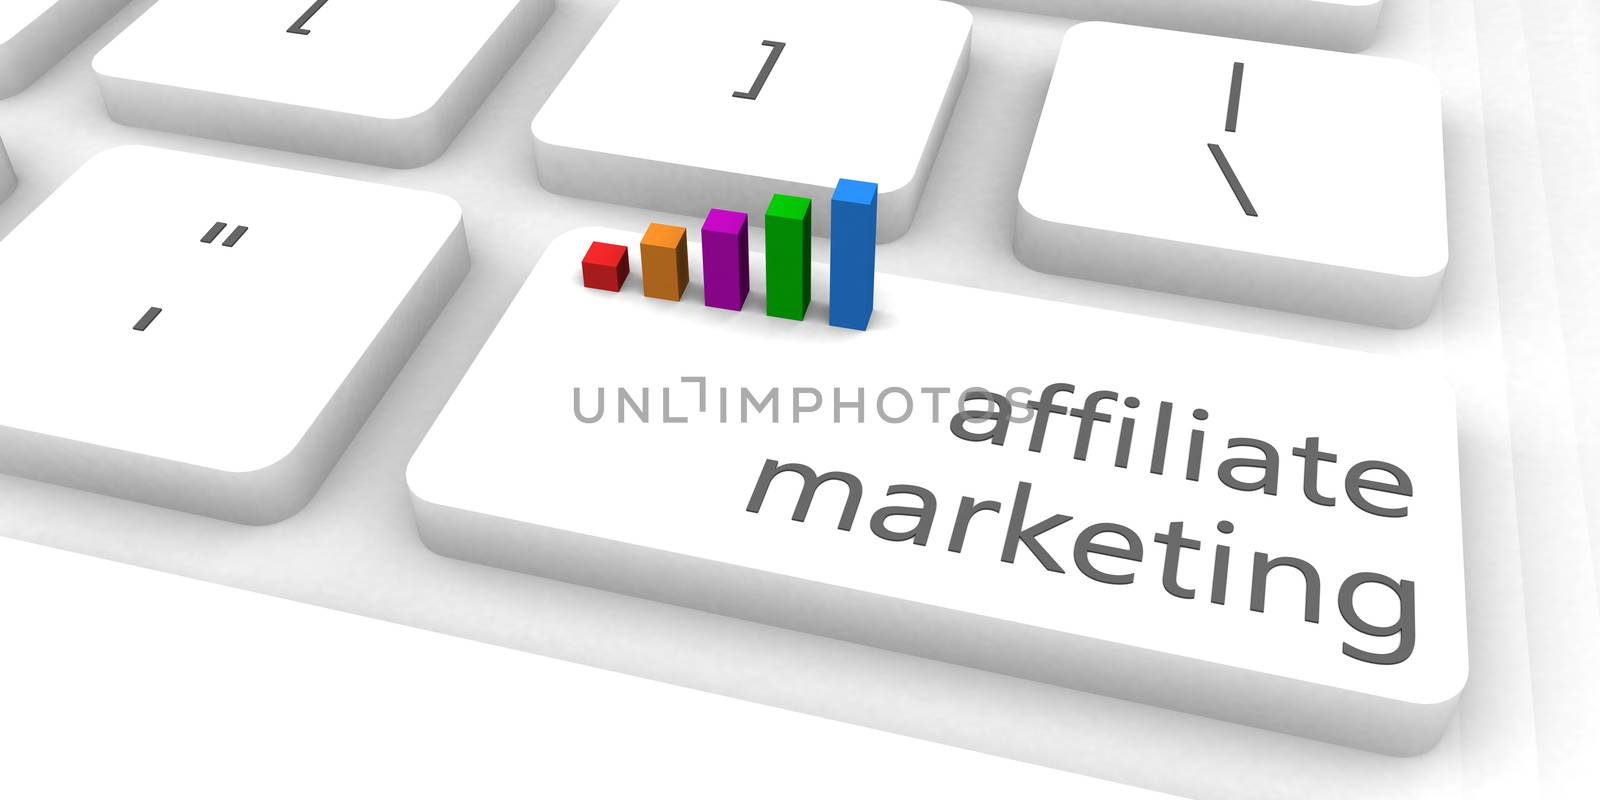 Affiliate Marketing as a Fast and Easy Website Concept